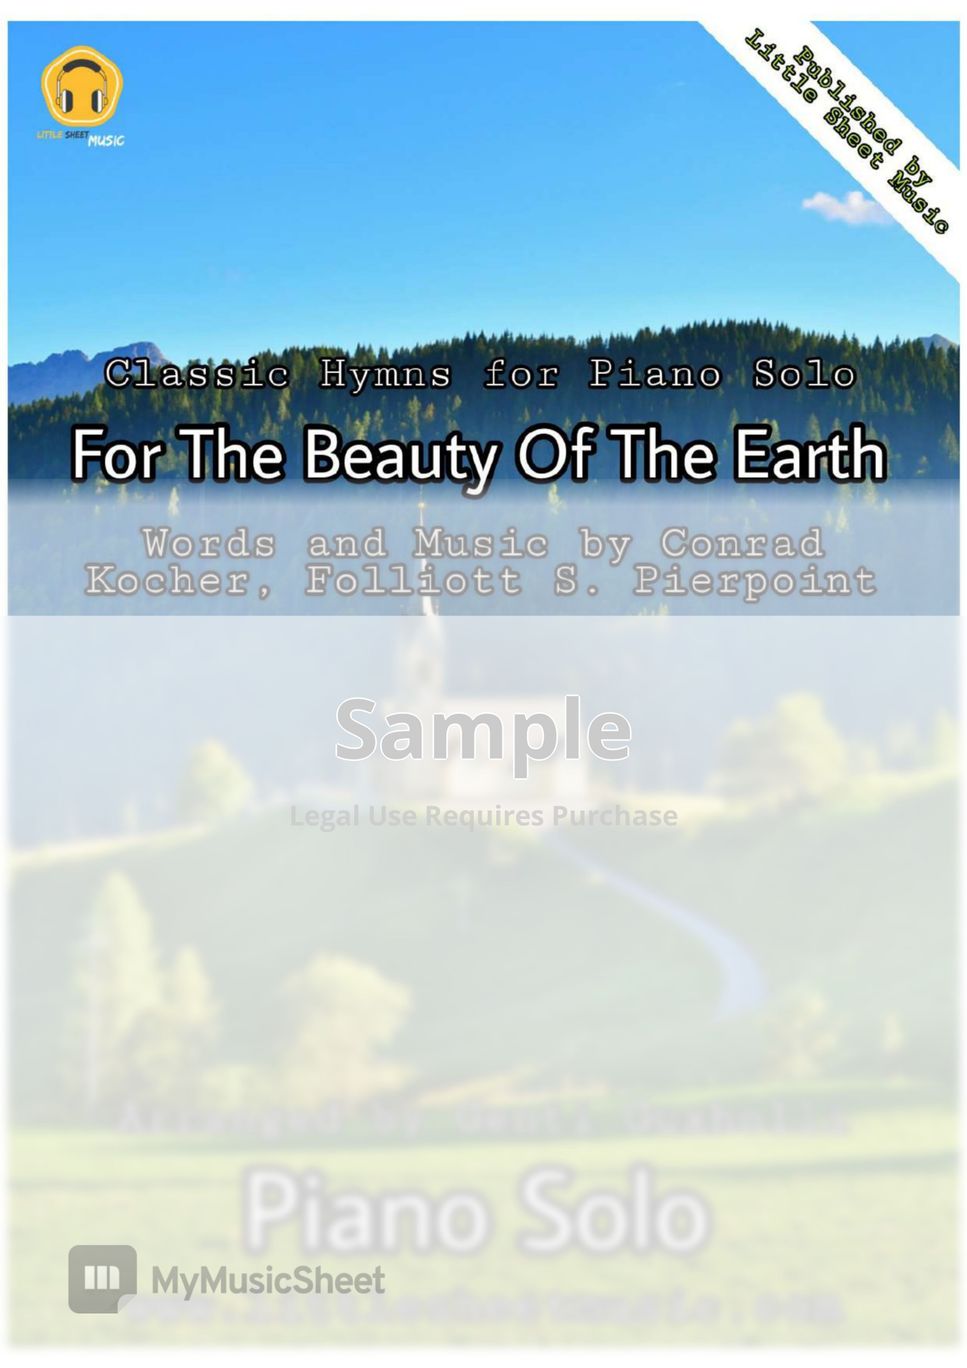 Conrad Kocher - For The Beauty Of The Earth by Genti Guxholli